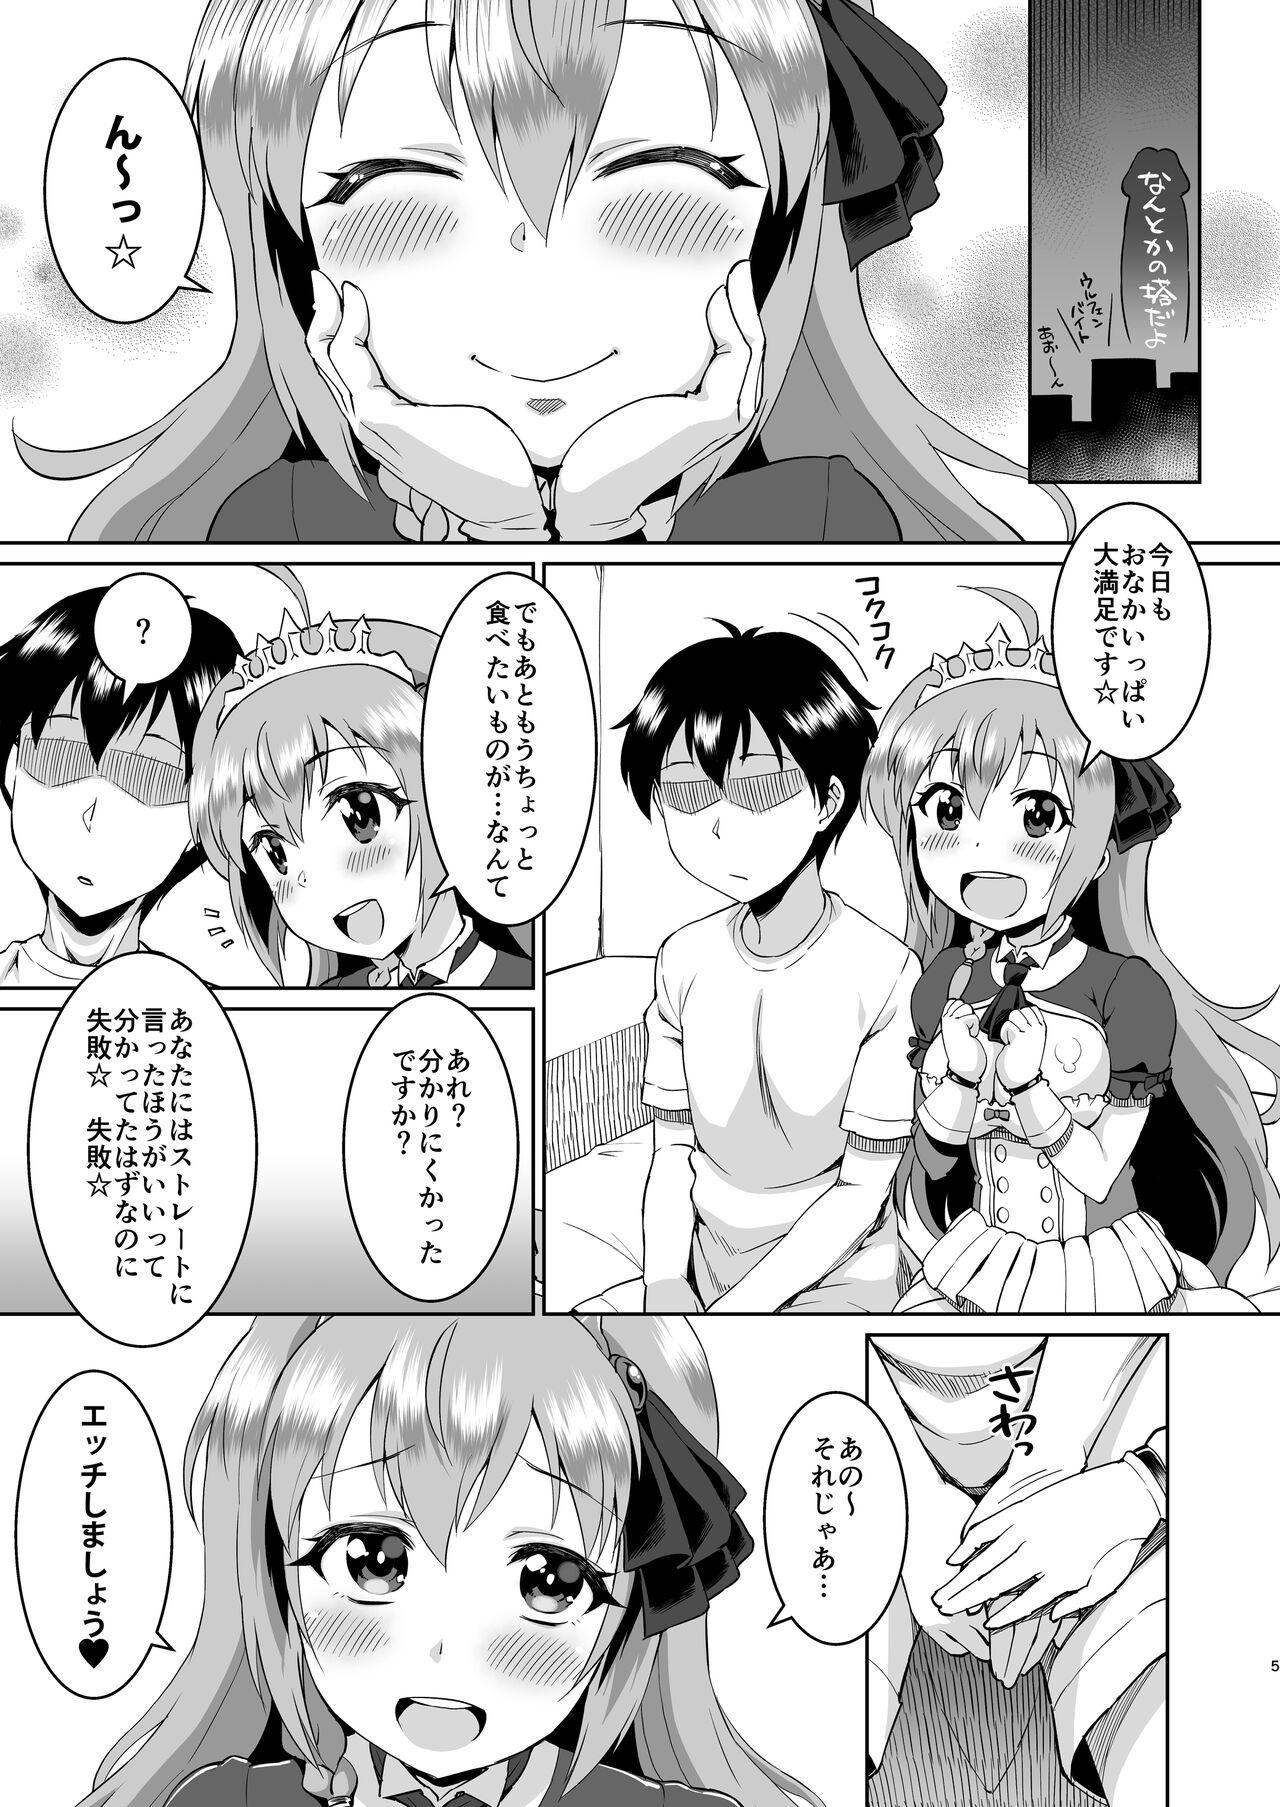 Gaping Peko-chan is so cute, isn't she? - Princess connect 3some - Page 4